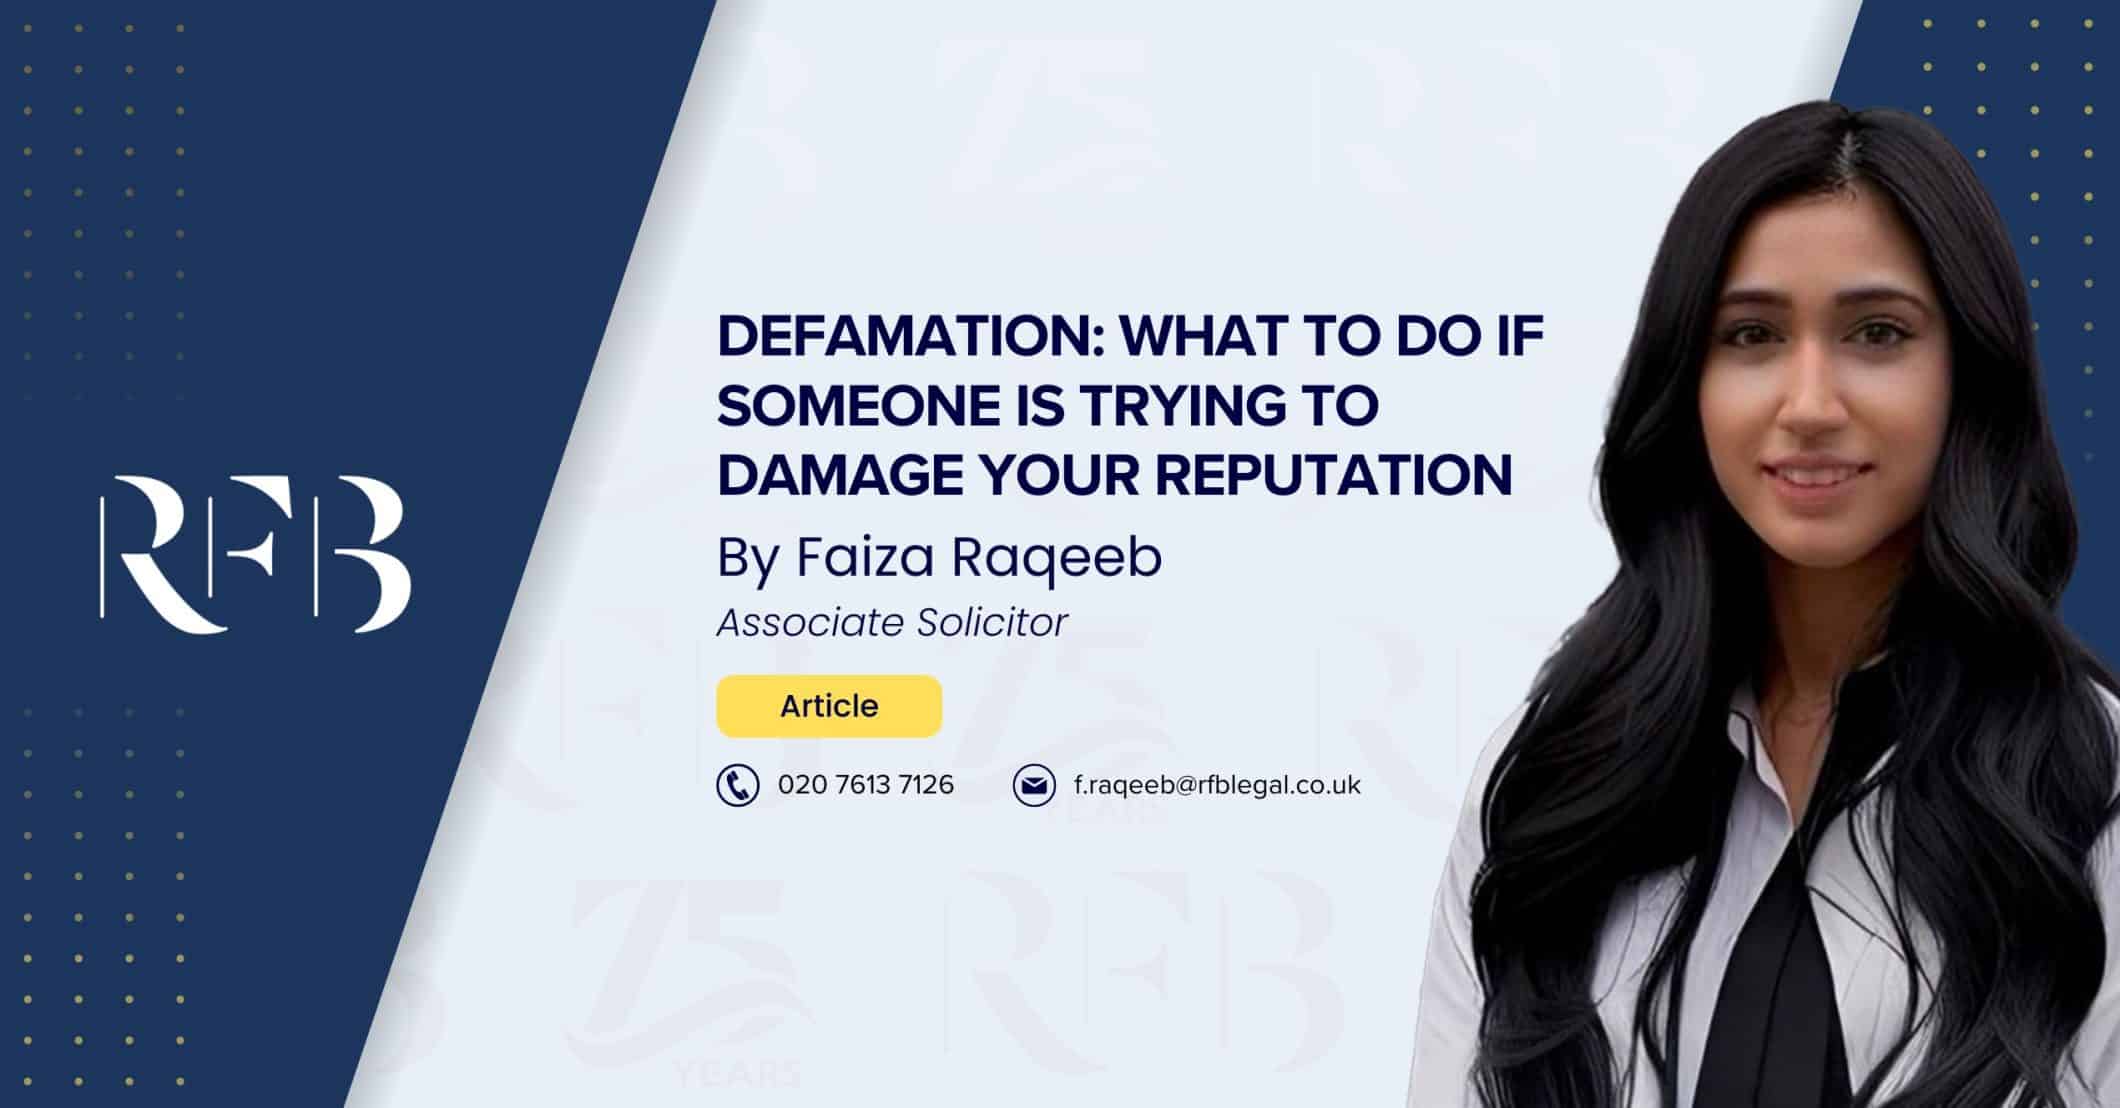 "Defamation: What to Do if Someone is Trying to Damage Your Reputation" article cover featuring author Faiza Raqeeb